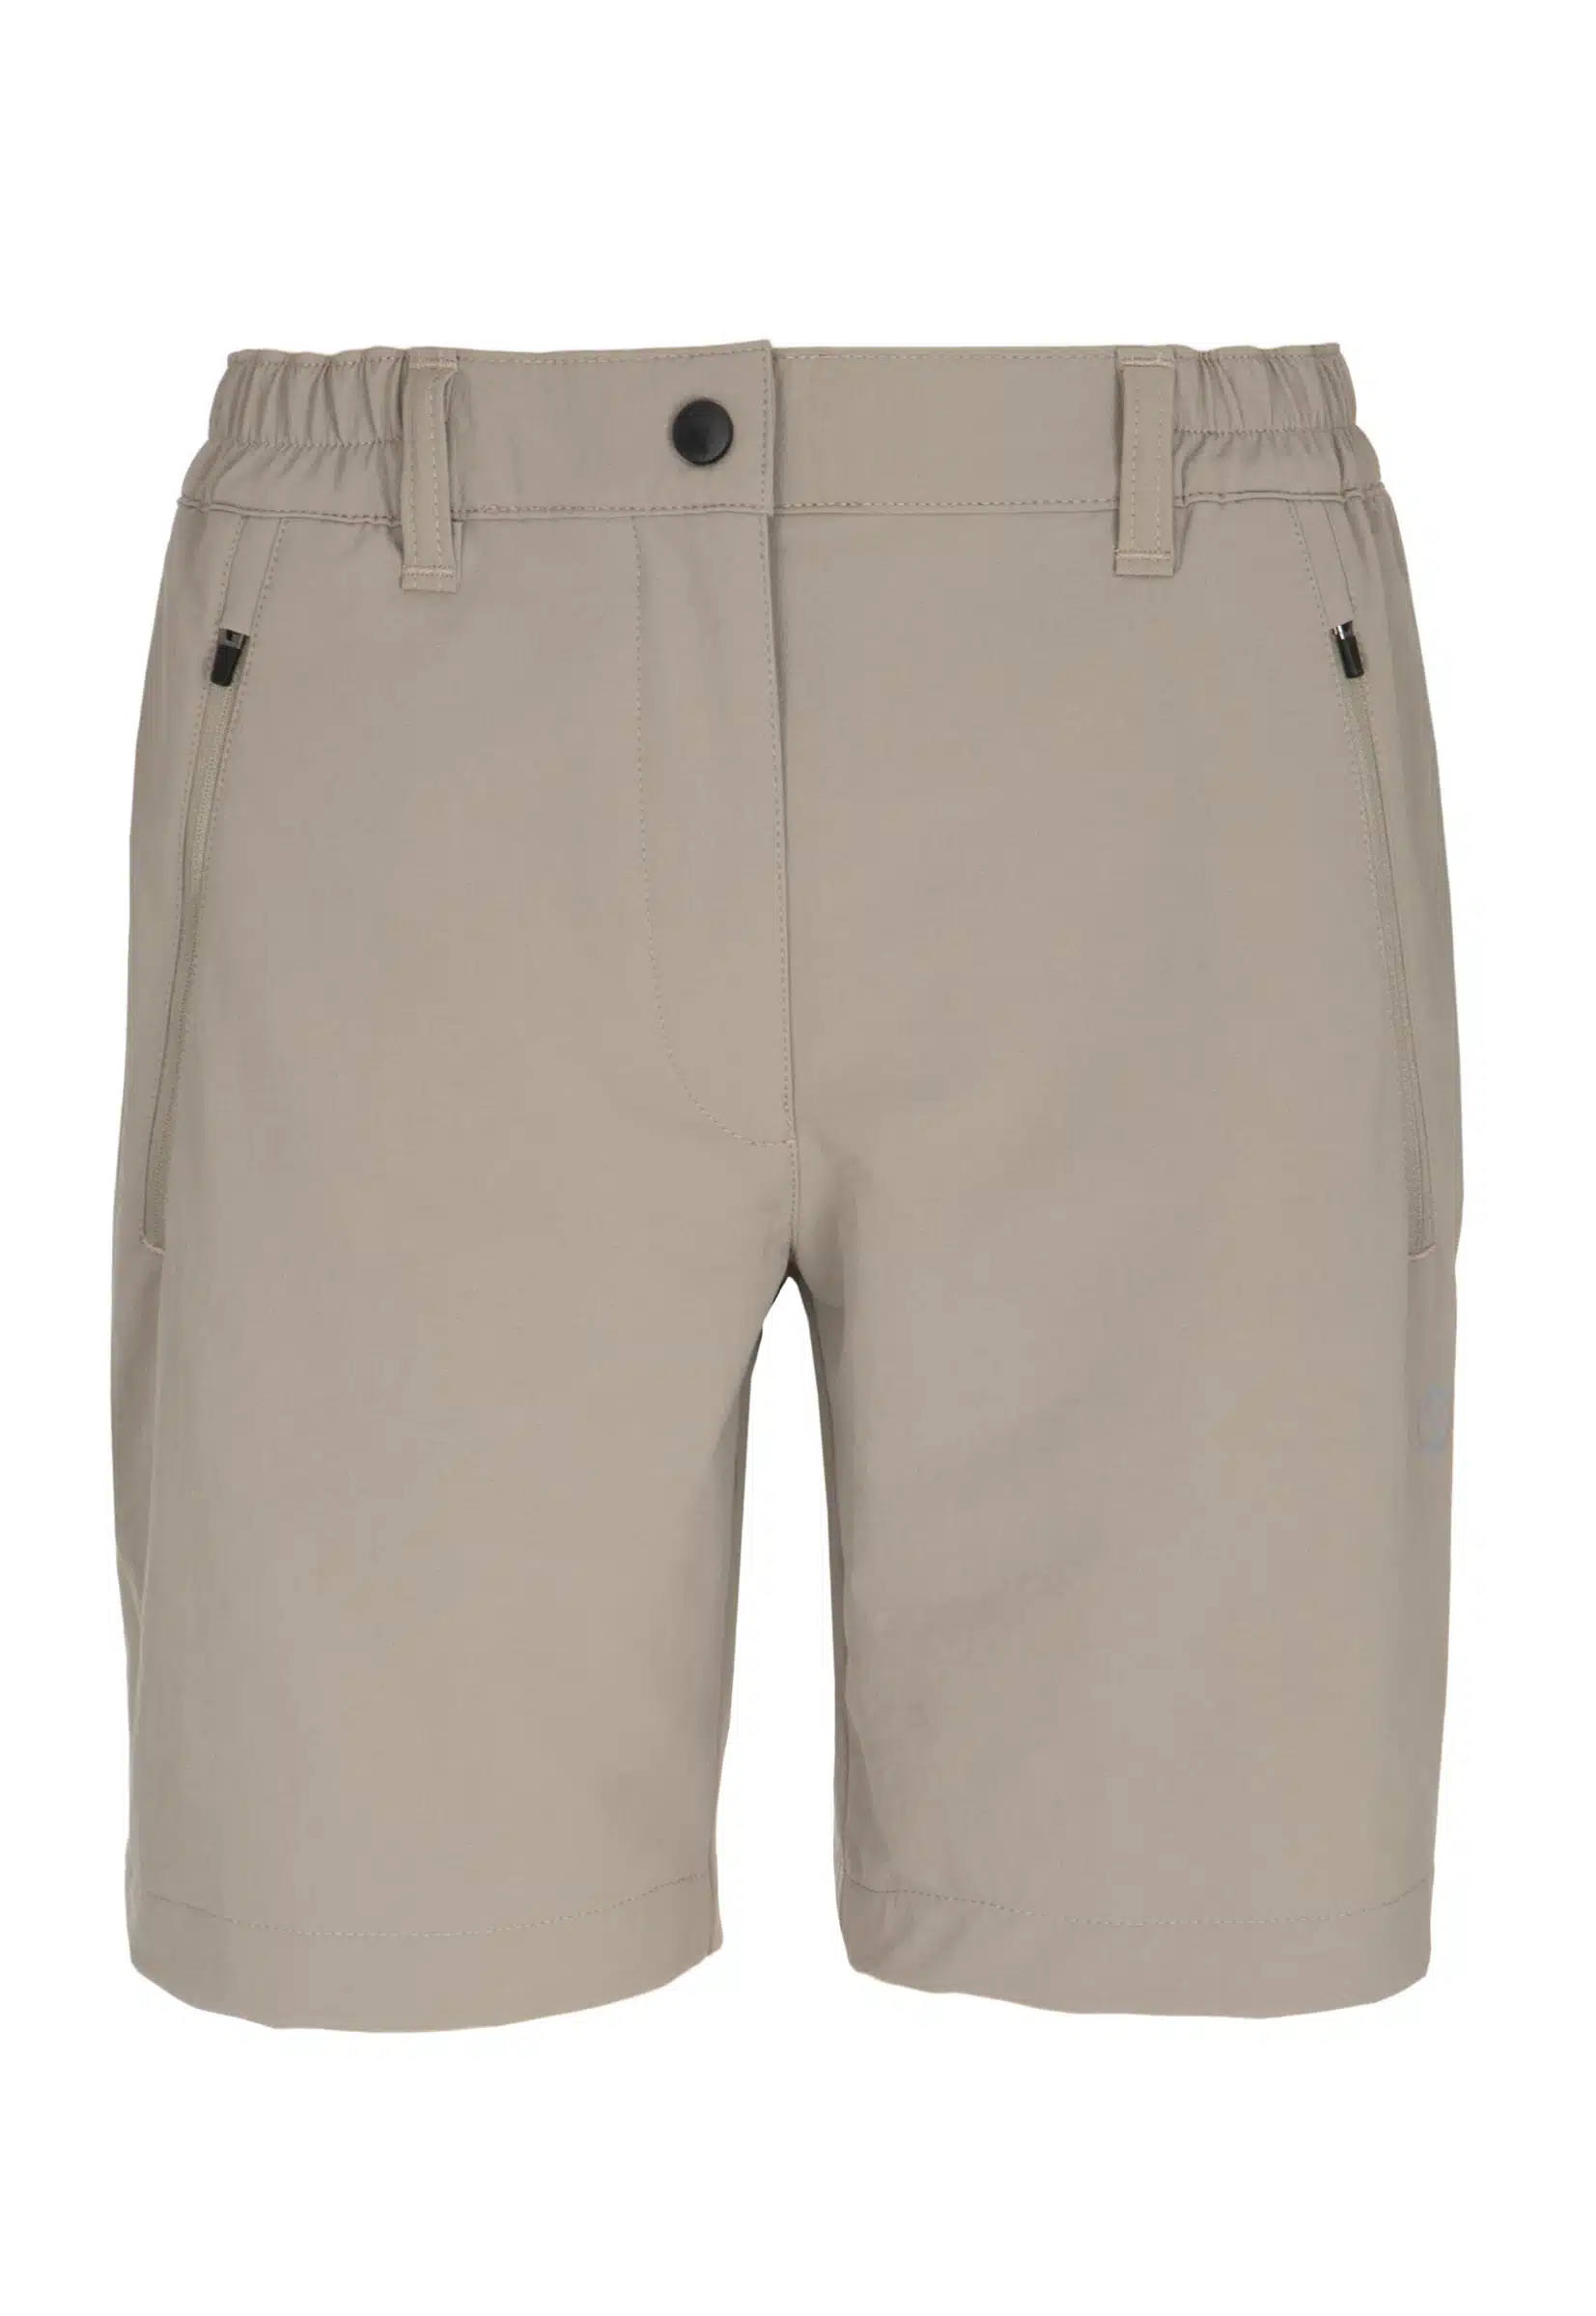 Silverpoint womens bowness shorts sand